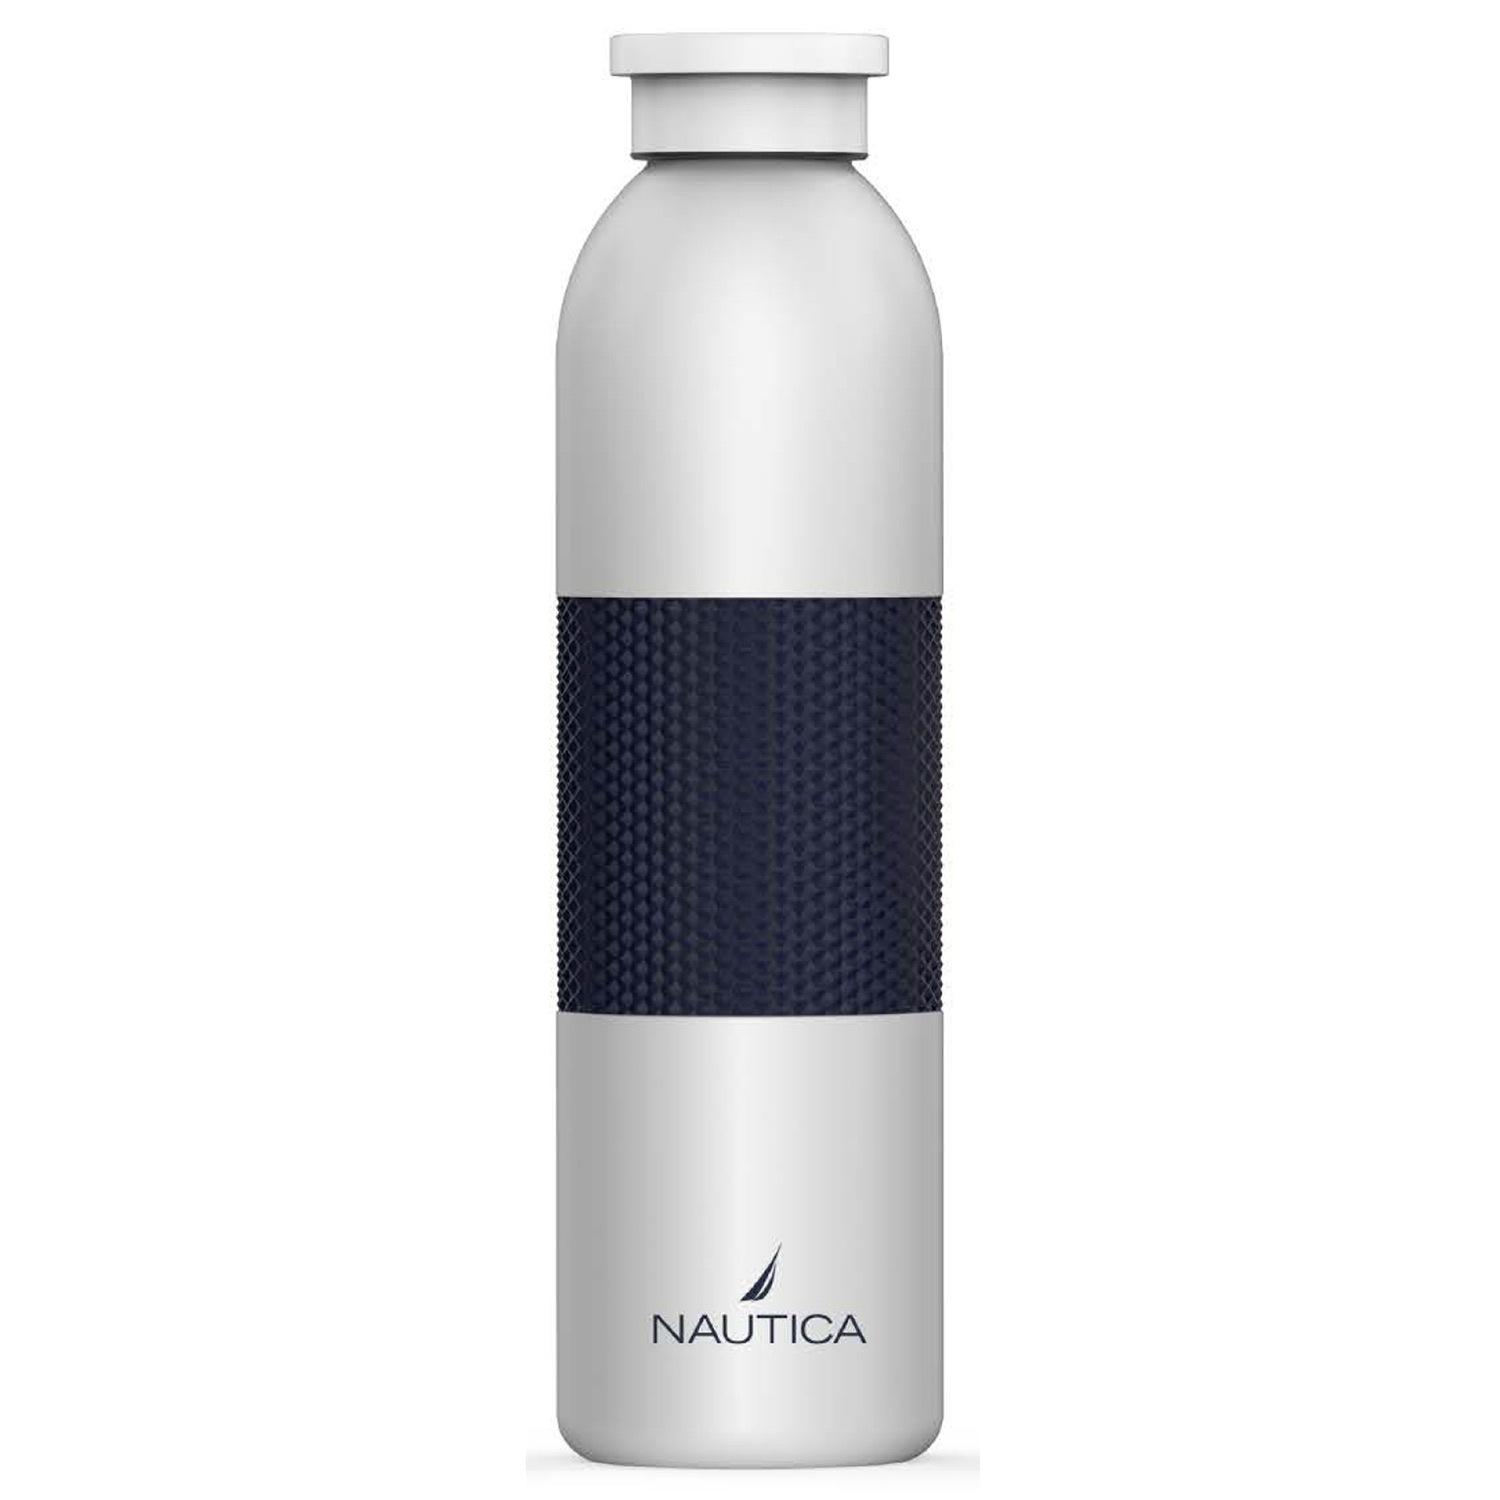 Aoibox 24 oz. Jetski Stainless Steel Insulated Water Bottle (Set